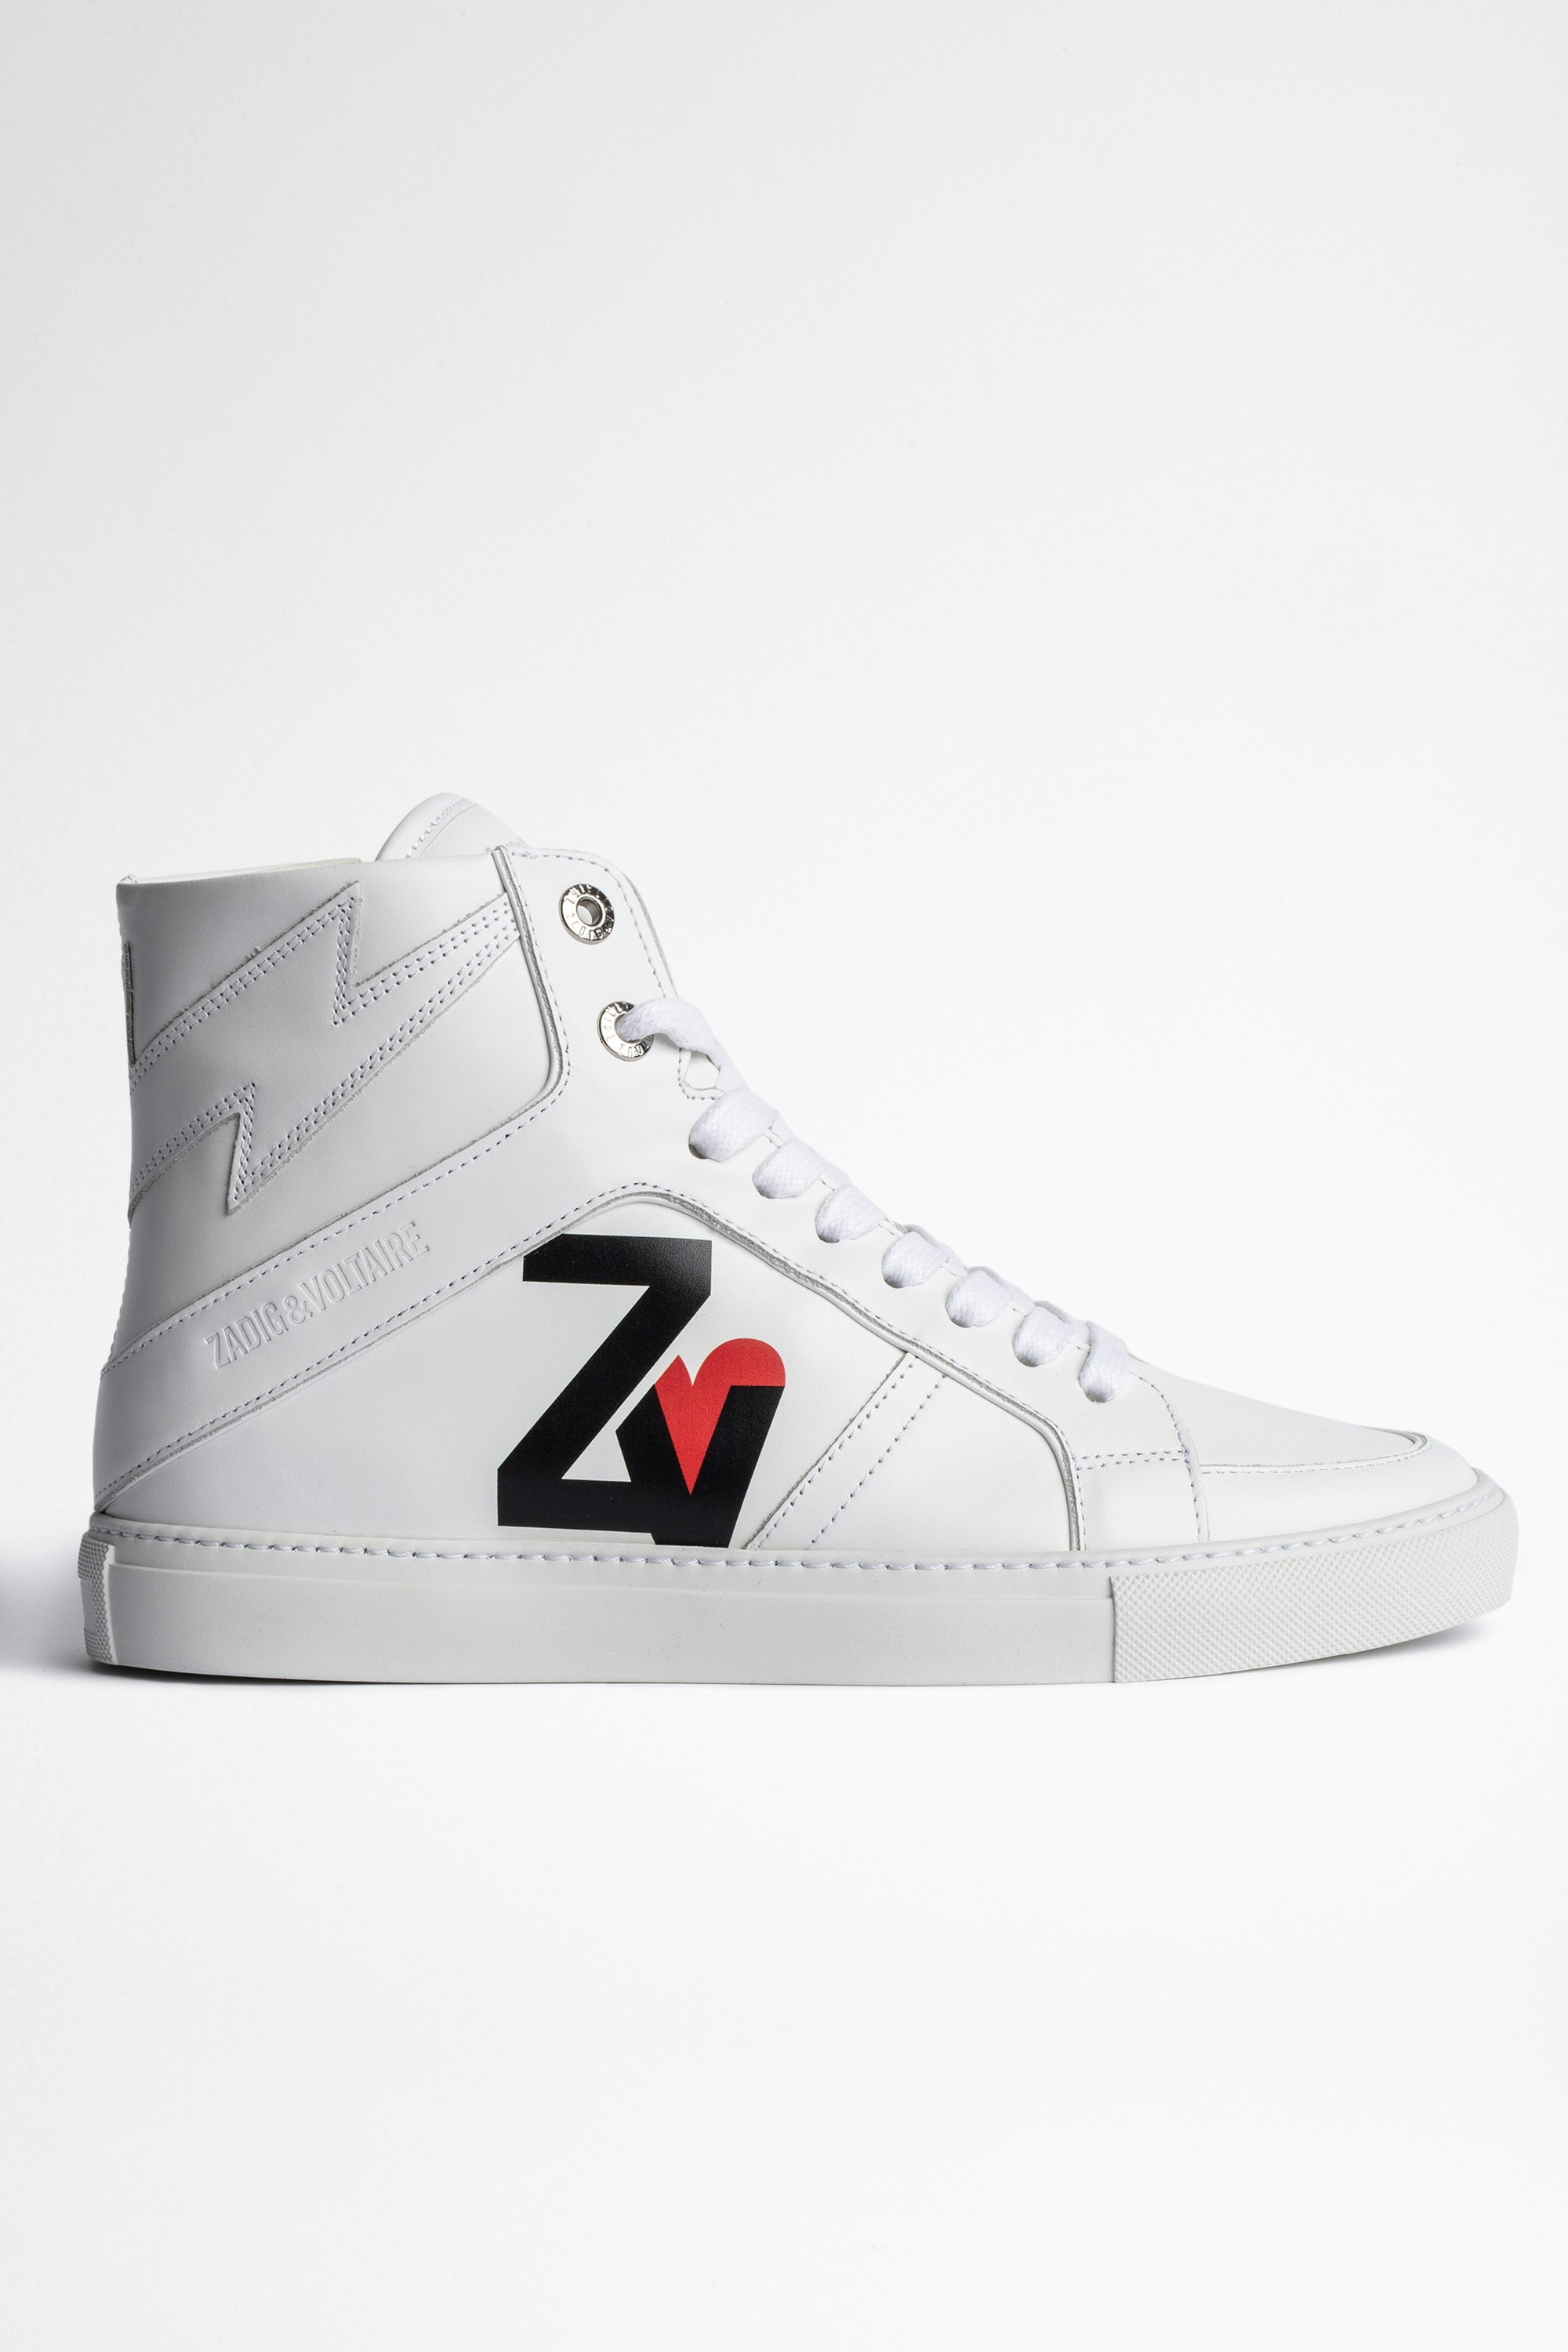 ZV1747 High Flash Sneakers Leather - Women’s white leather high-top sneakers with ZV heart